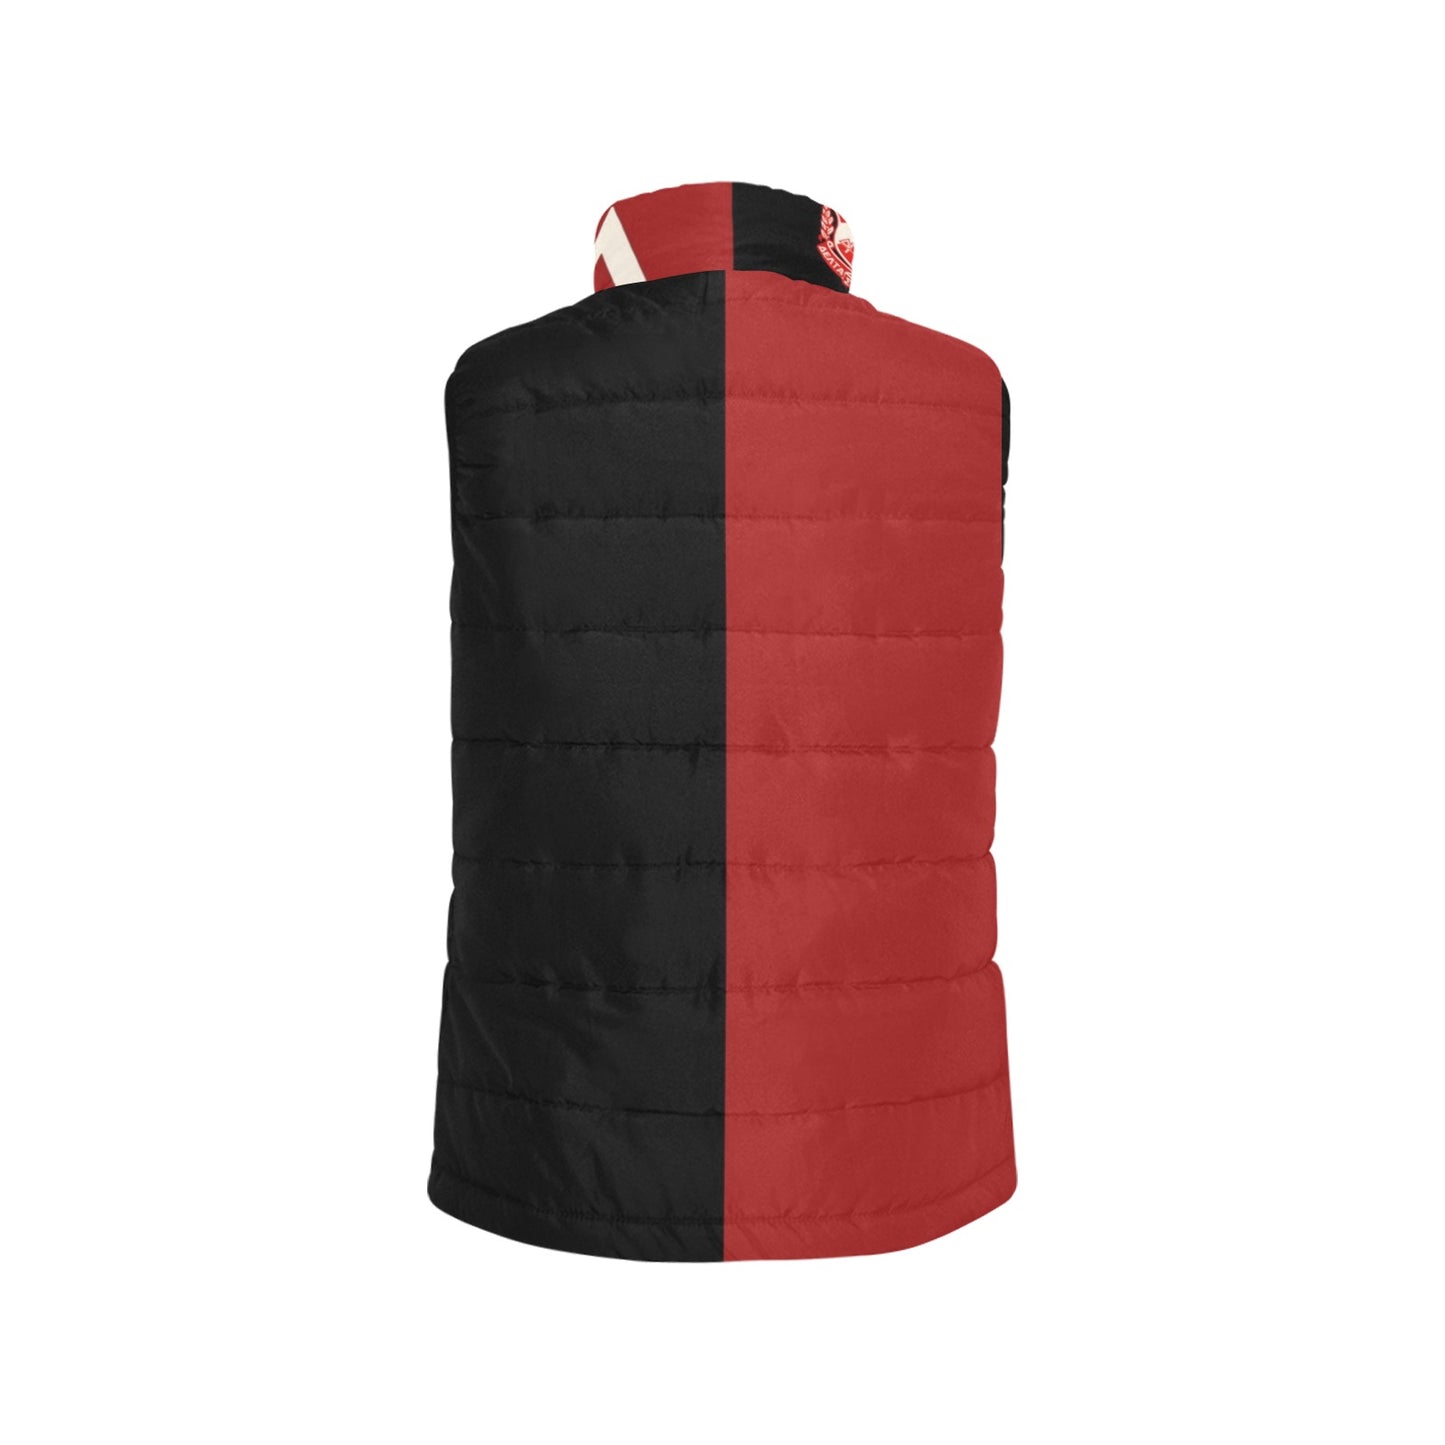 The DST Red Black Puffer Vest